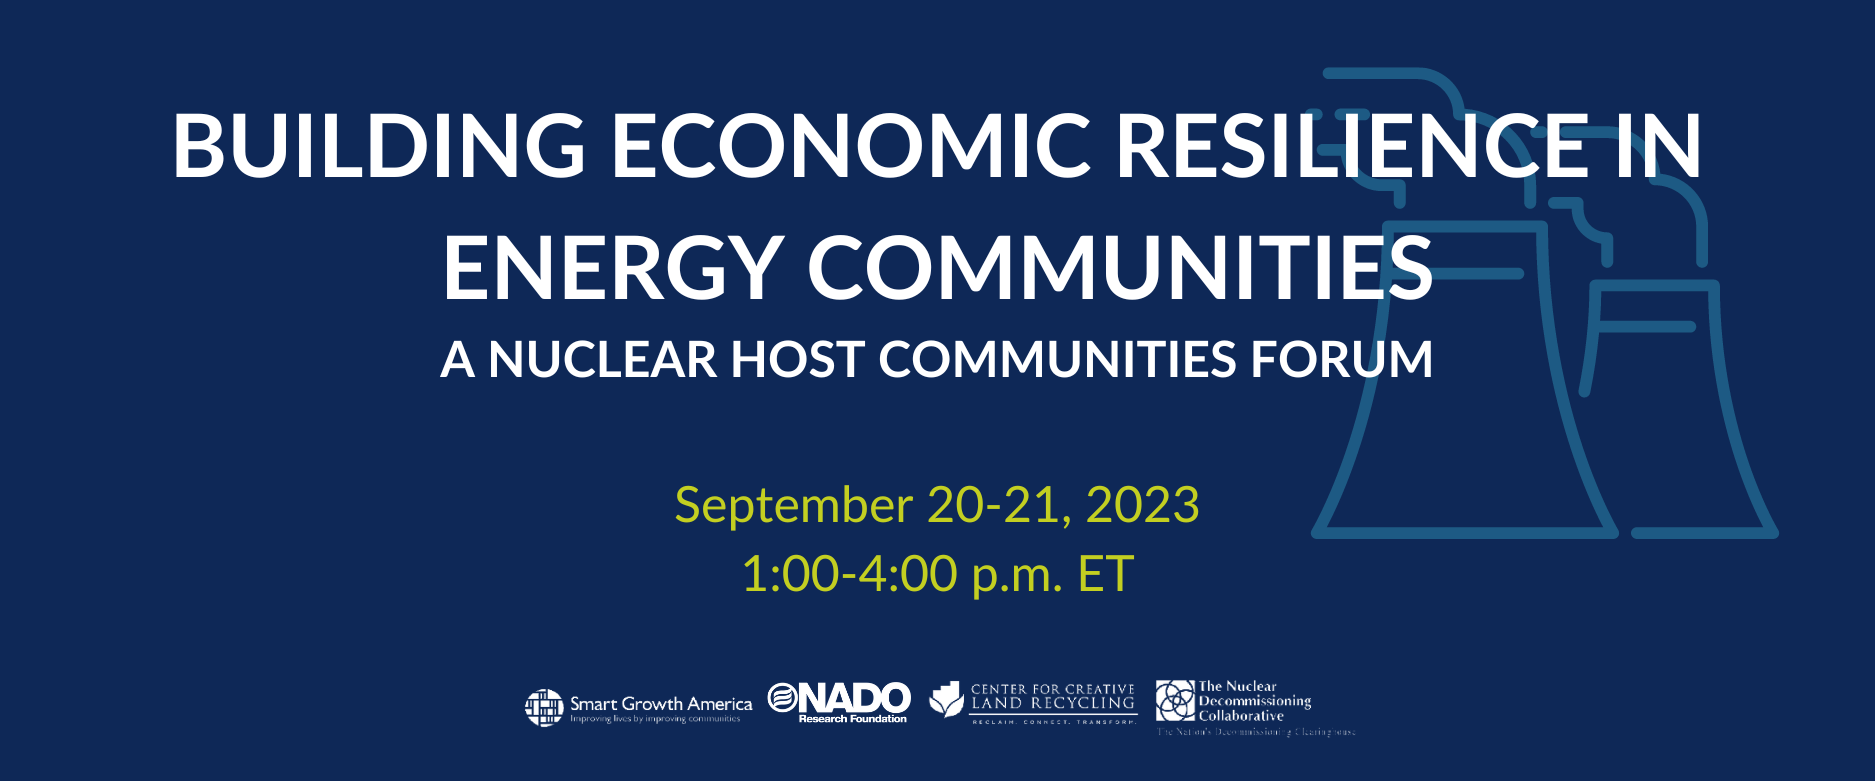 Building Economic Resilience in Energy Communities: A Nuclear Host Communities Forum